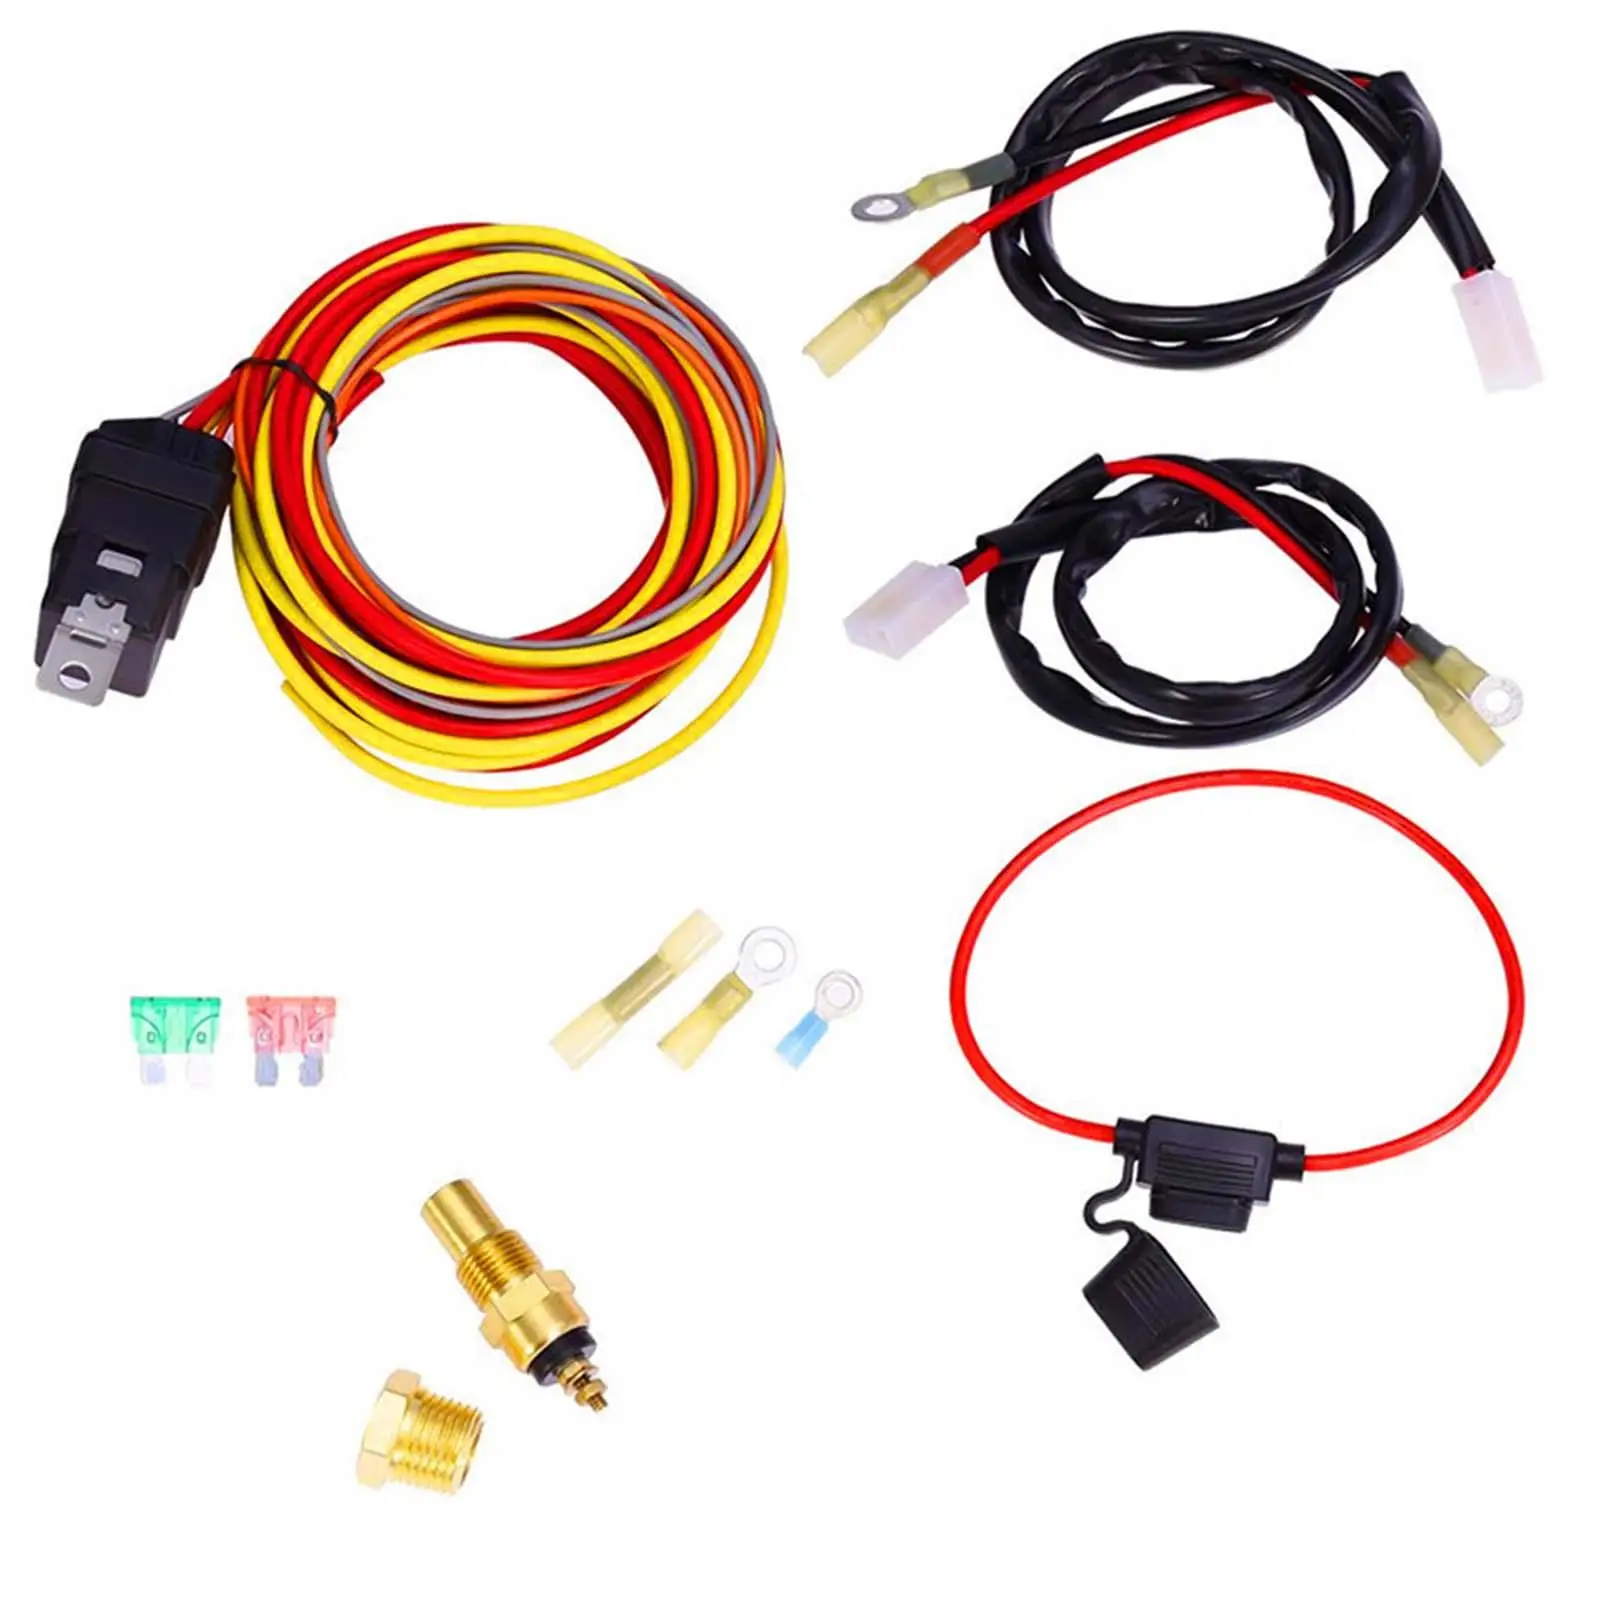 Cooling Fan Wiring Harness Kit 185 Degree on 165 Off Thermostat Switch Electric Cooling Fan Wiring Thermostat Harness Relay Kit